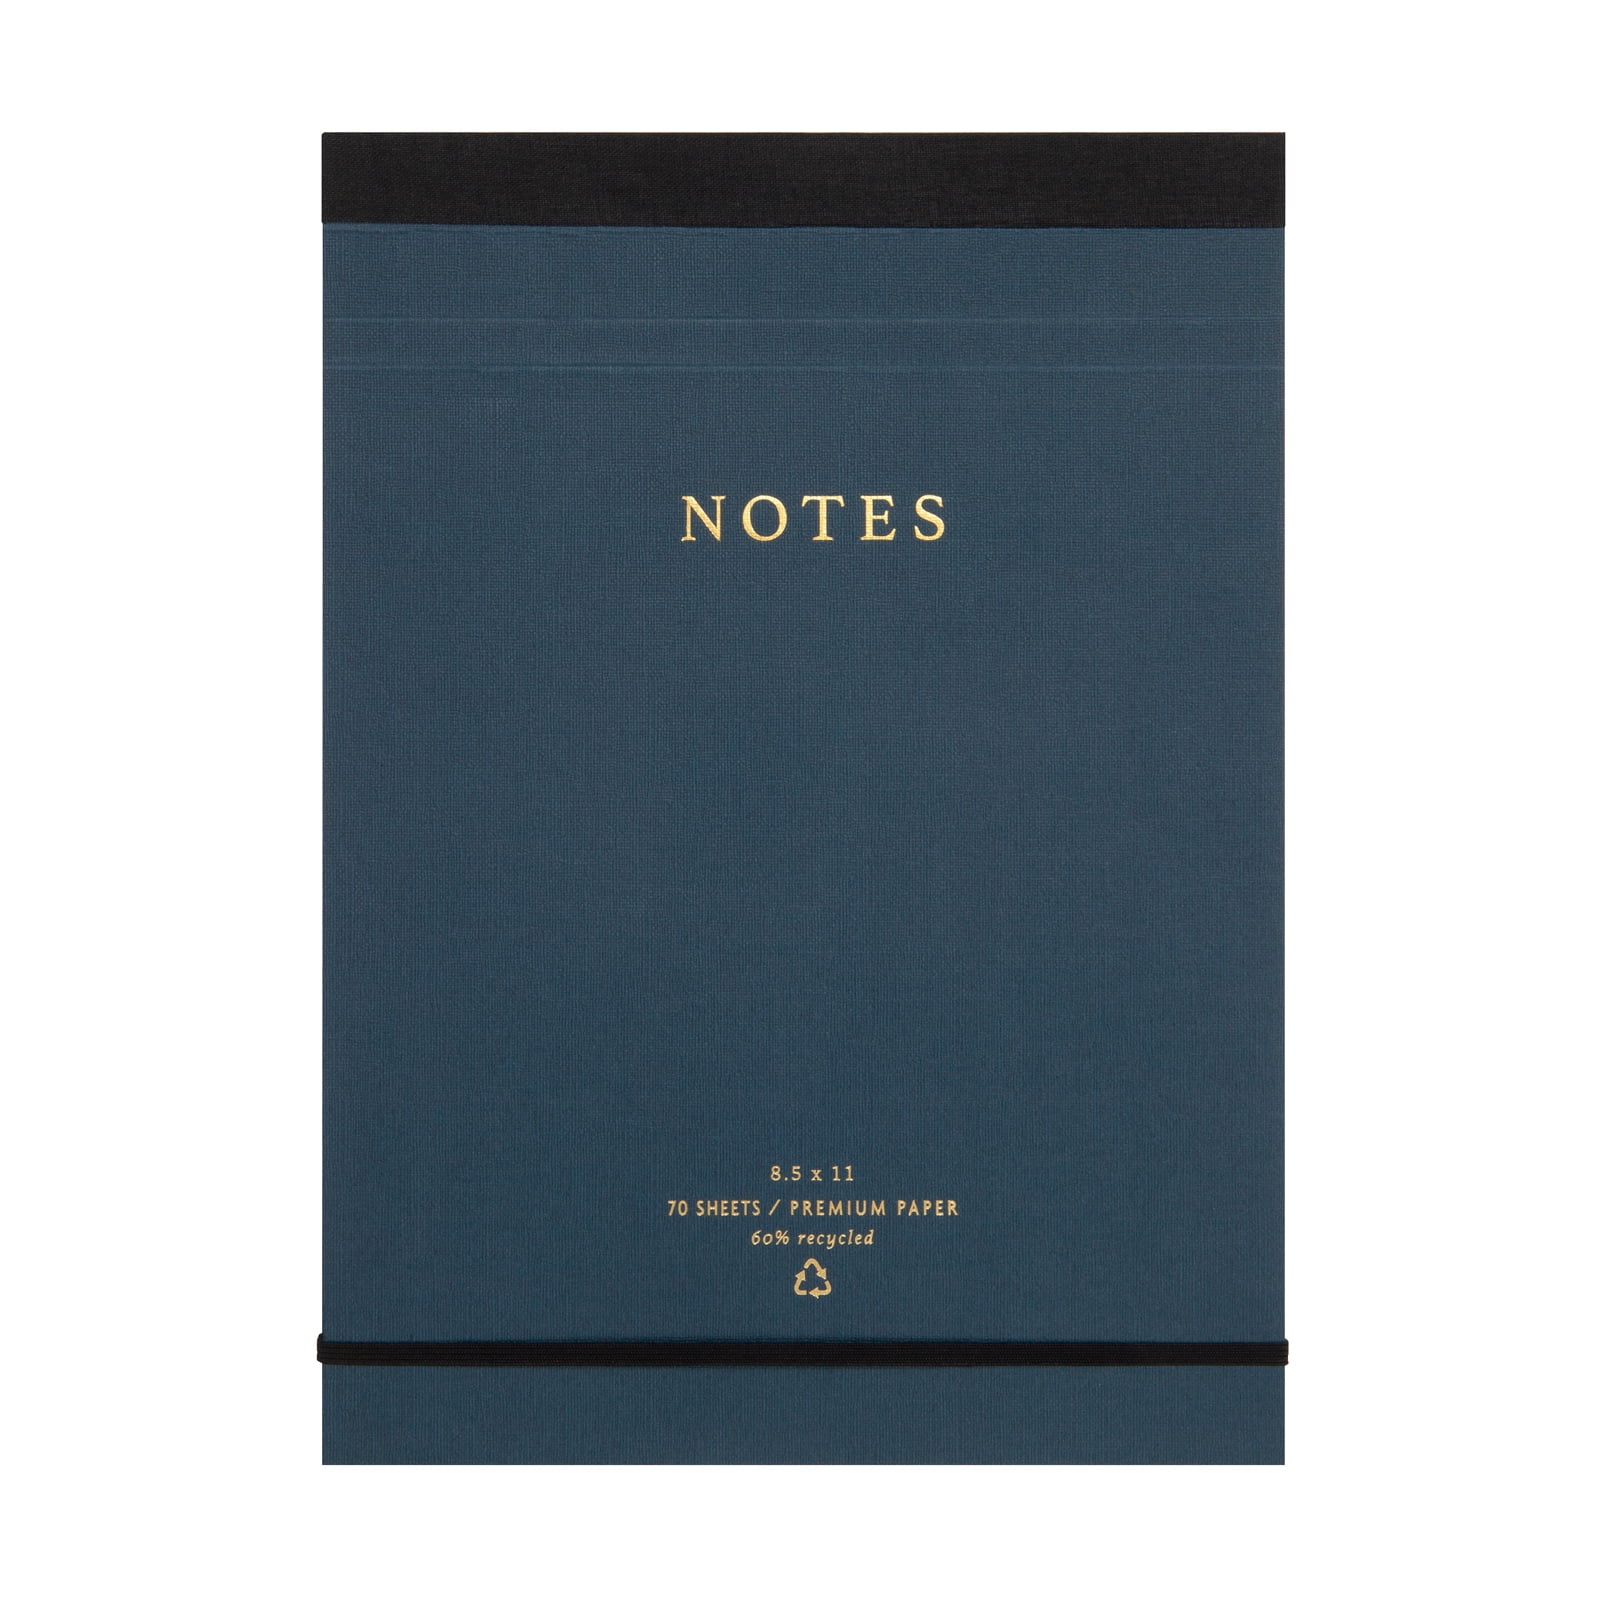 Mintgreen Covered Legal Pad, 70 Lined Sheets, Recycled Paper, Navy